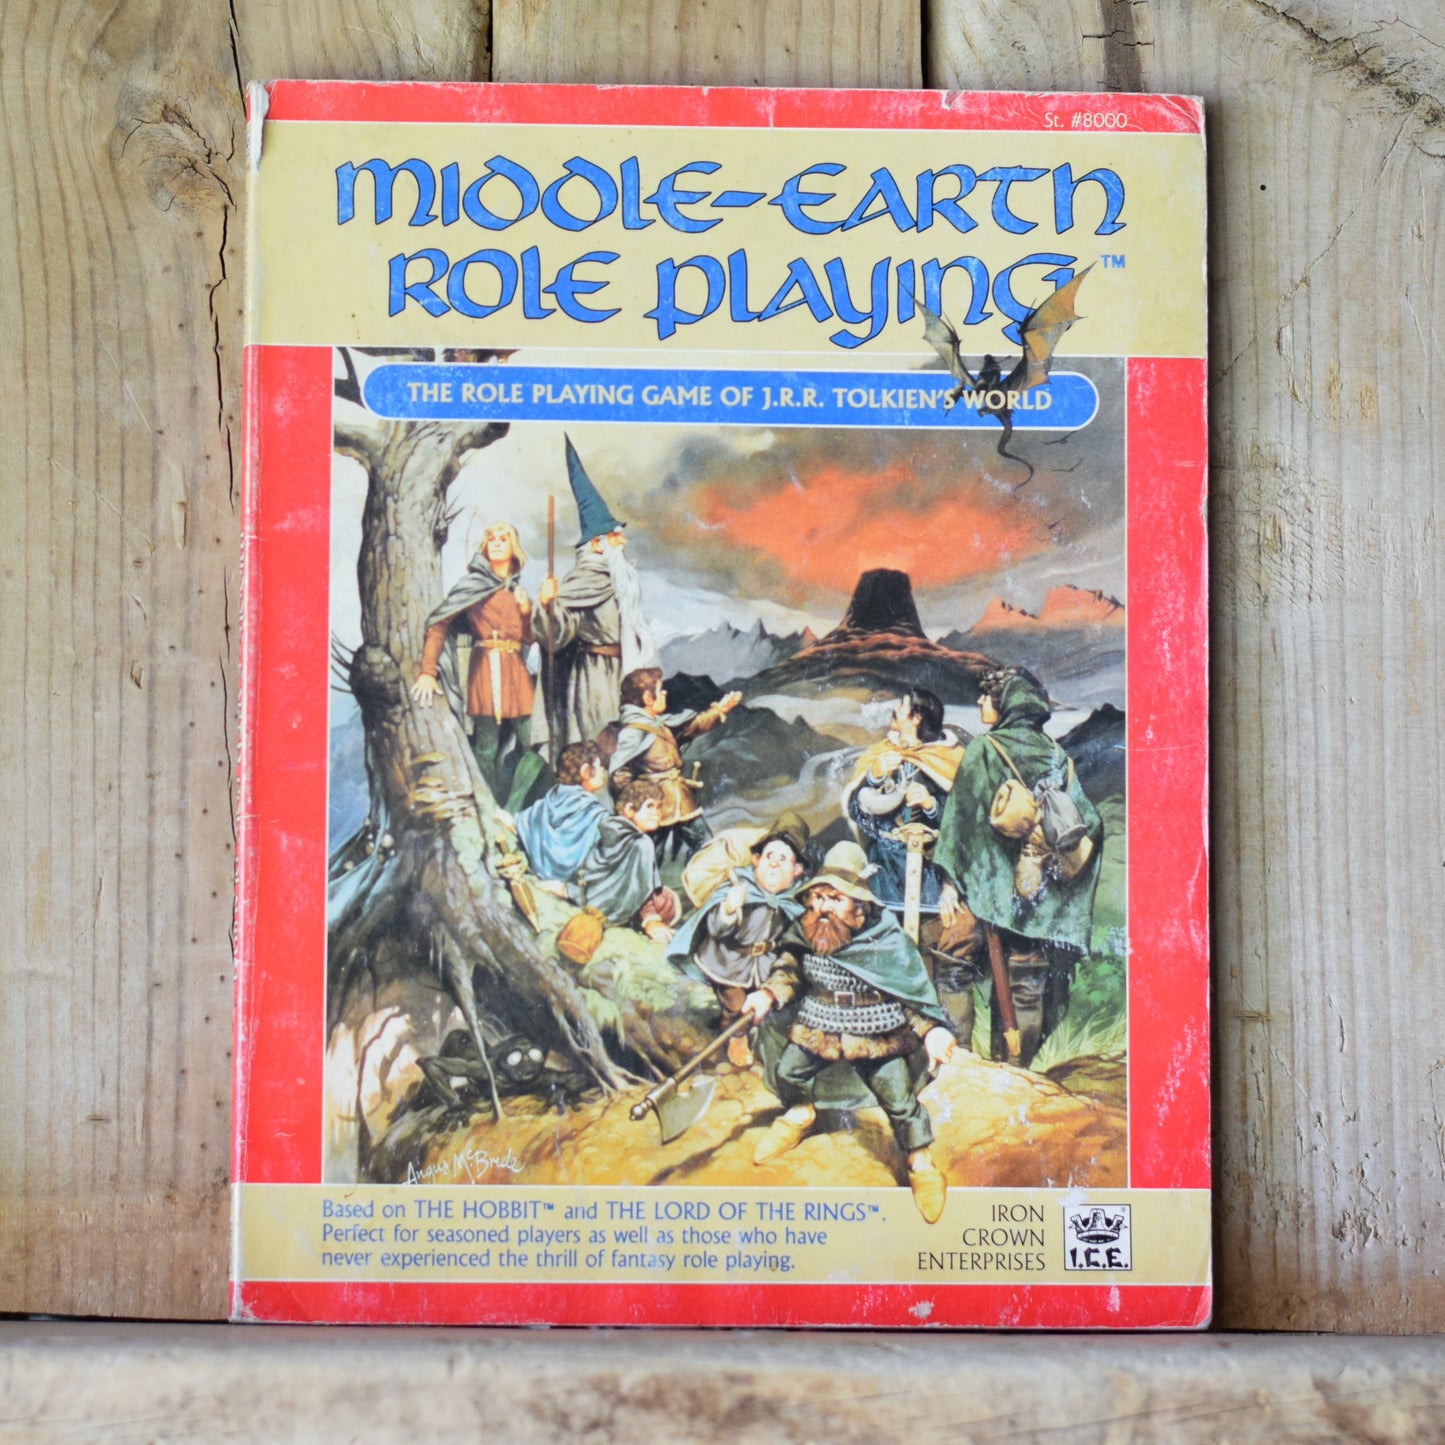 Vintage RPG Paperback: Middle-Earth Role Playing, The Role Playing Game of JRR Tolkien's World, 2nd Edition